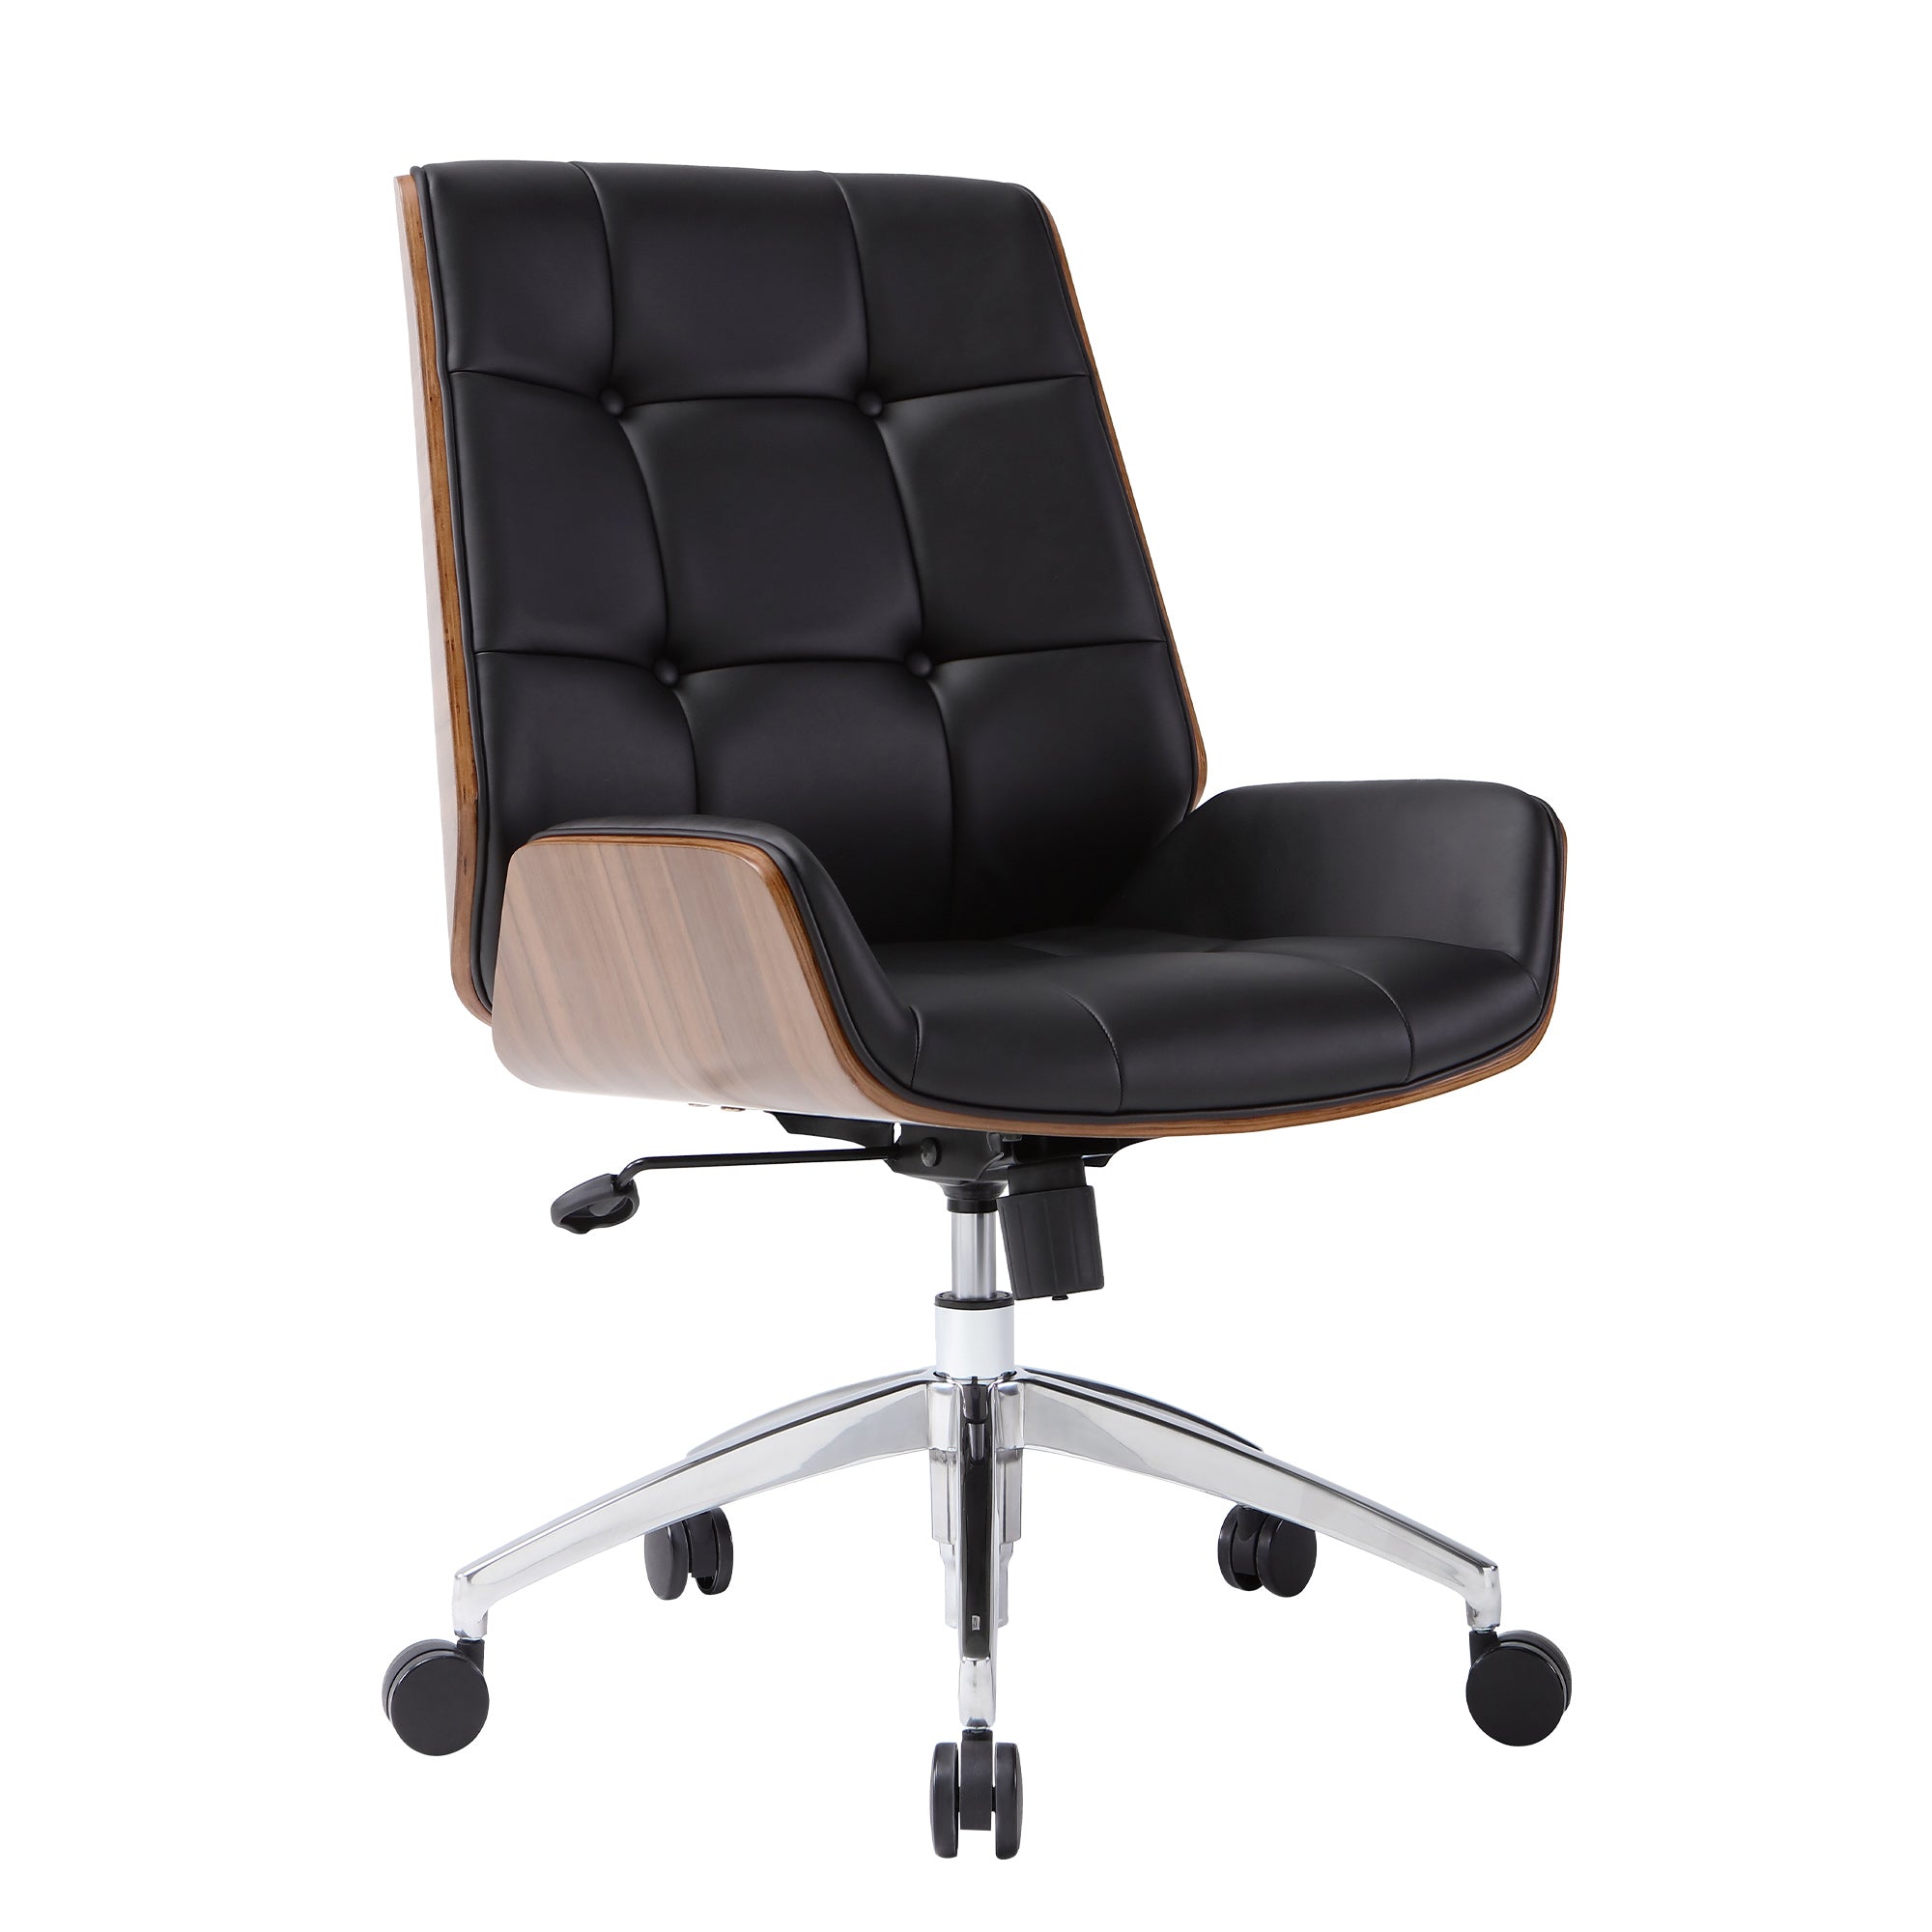 Executive Office Chair with Adjustable Height, Tilt Function, Solid Wood Arms and Base, 360° Swivel - Leather Office Chair for Office and Home Work in Black